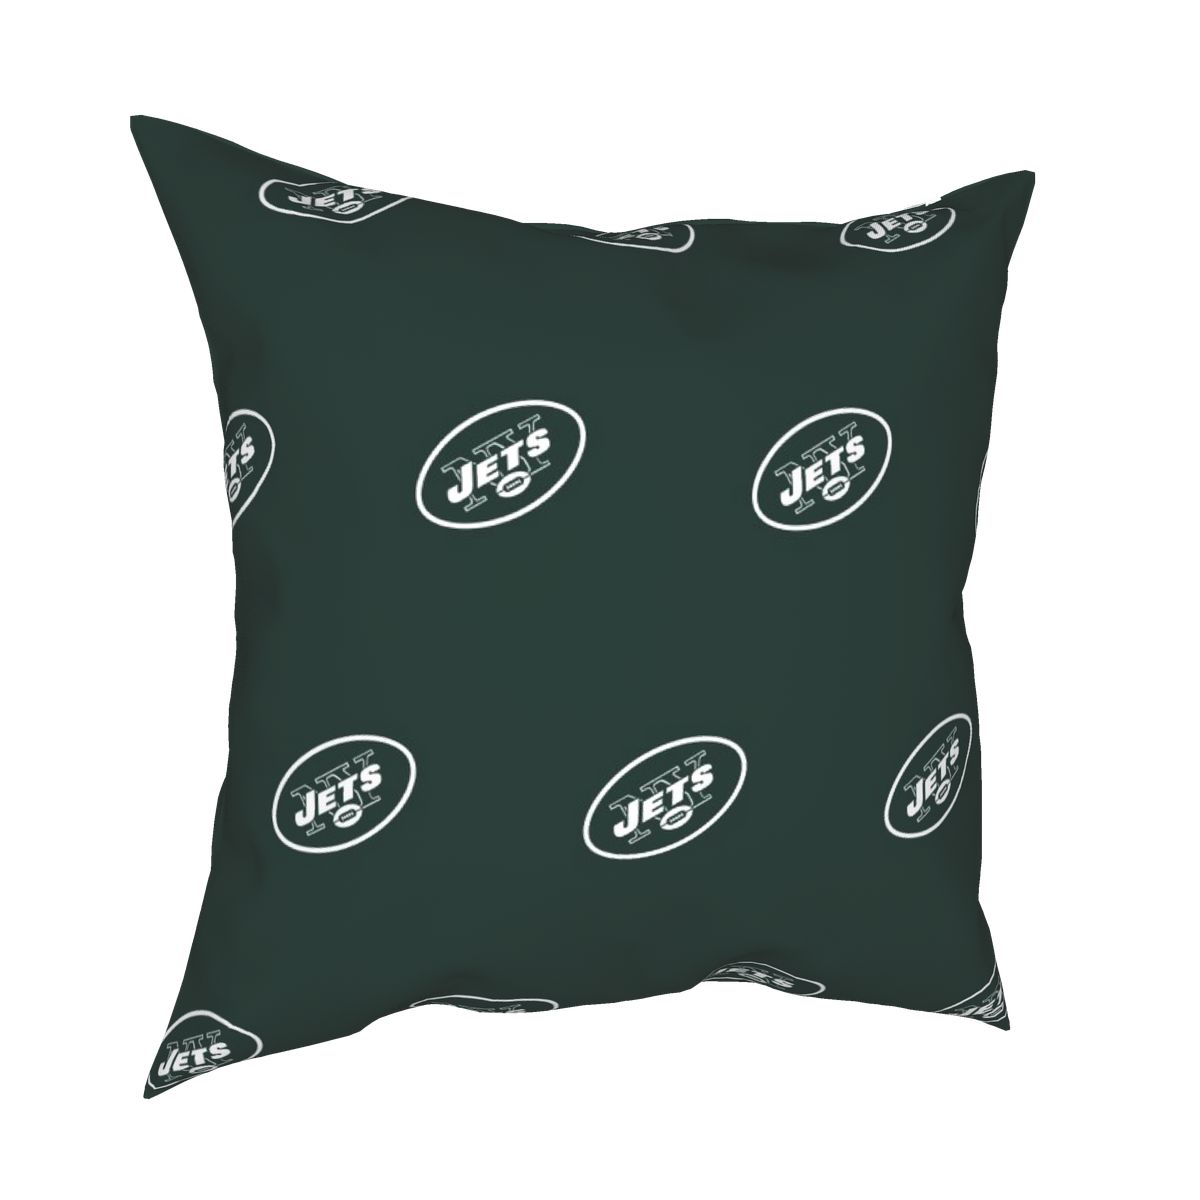 Custom Decorative Football Pillow Case New York Jets Pillowcase Personalized Throw Pillow Covers